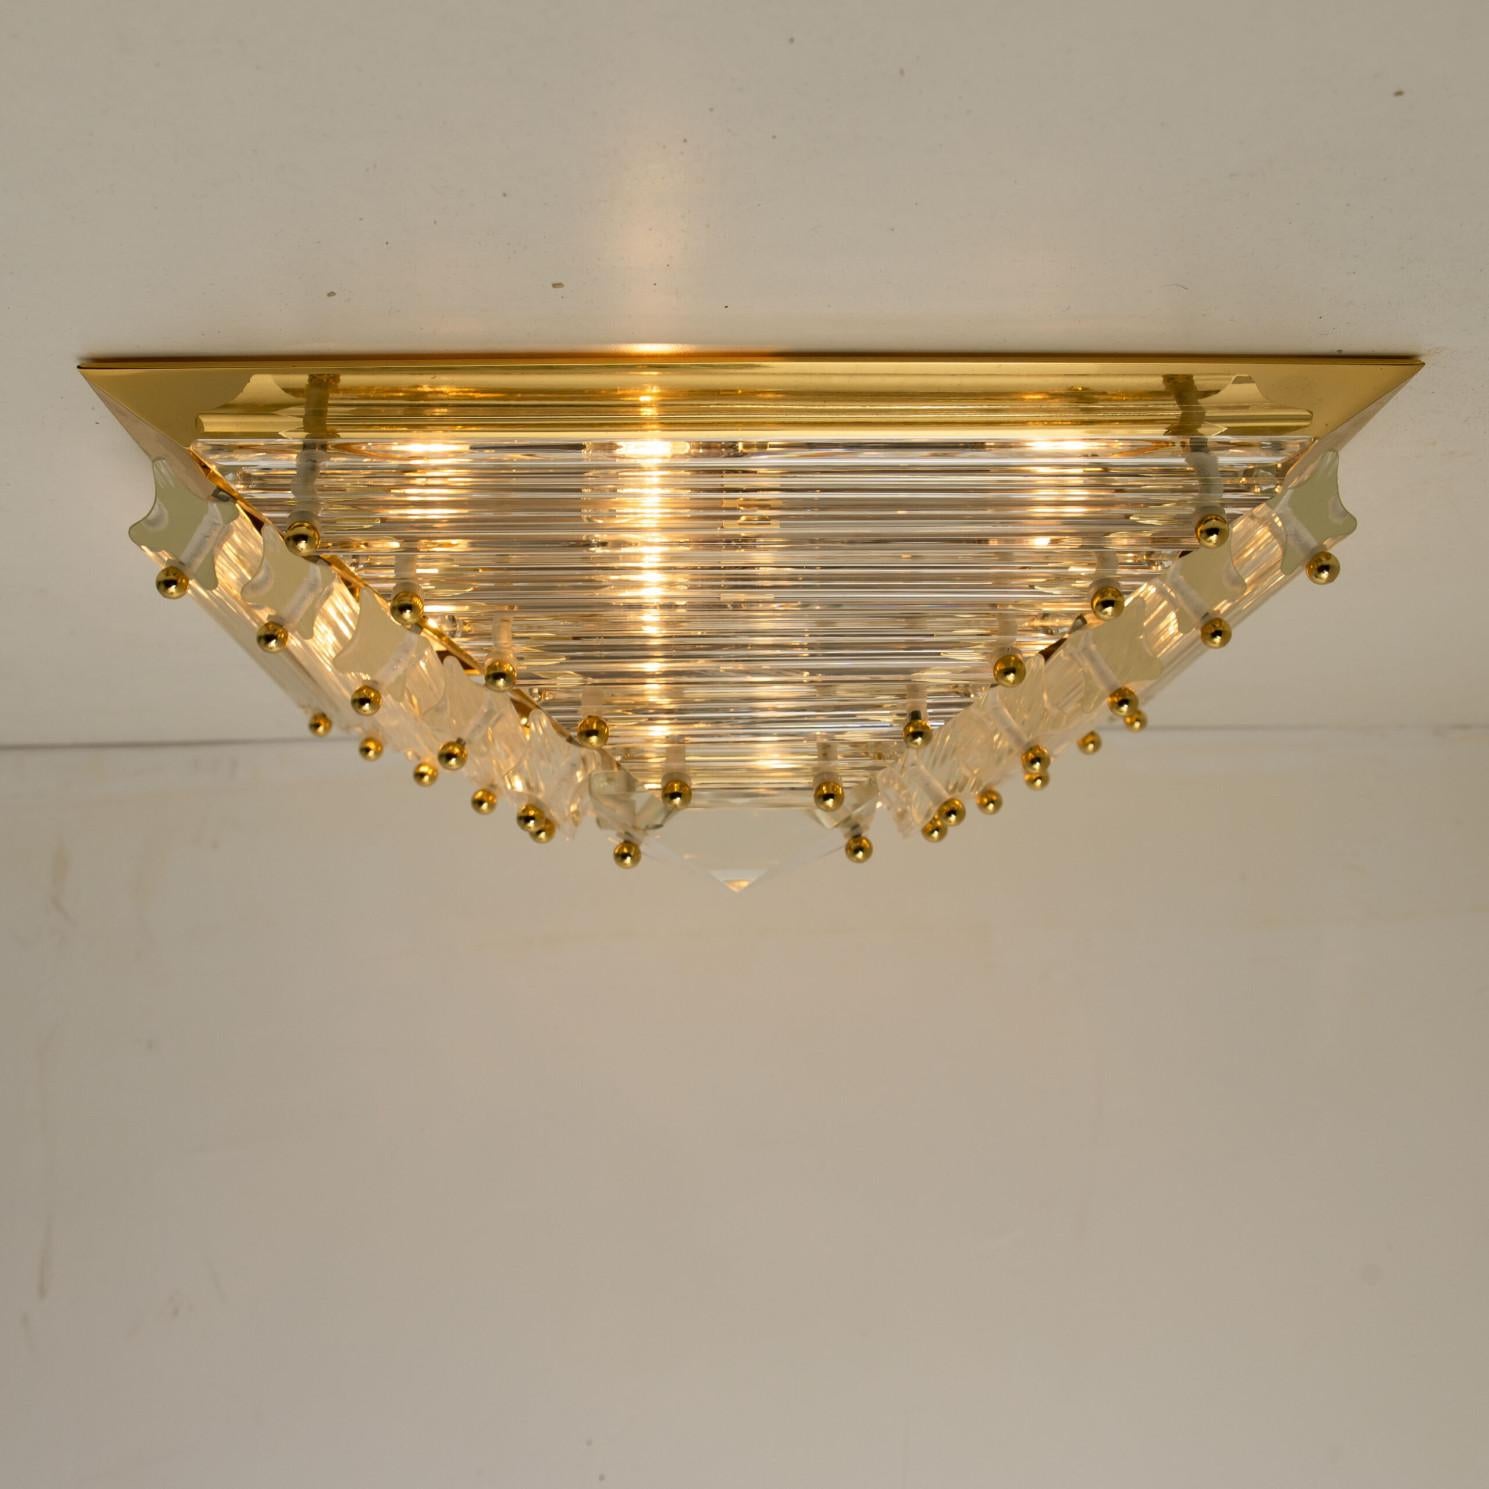 1 of the 2 Huge Gold-Plated Piramide Venini Flush Mounts, 1970s, Italy For Sale 9